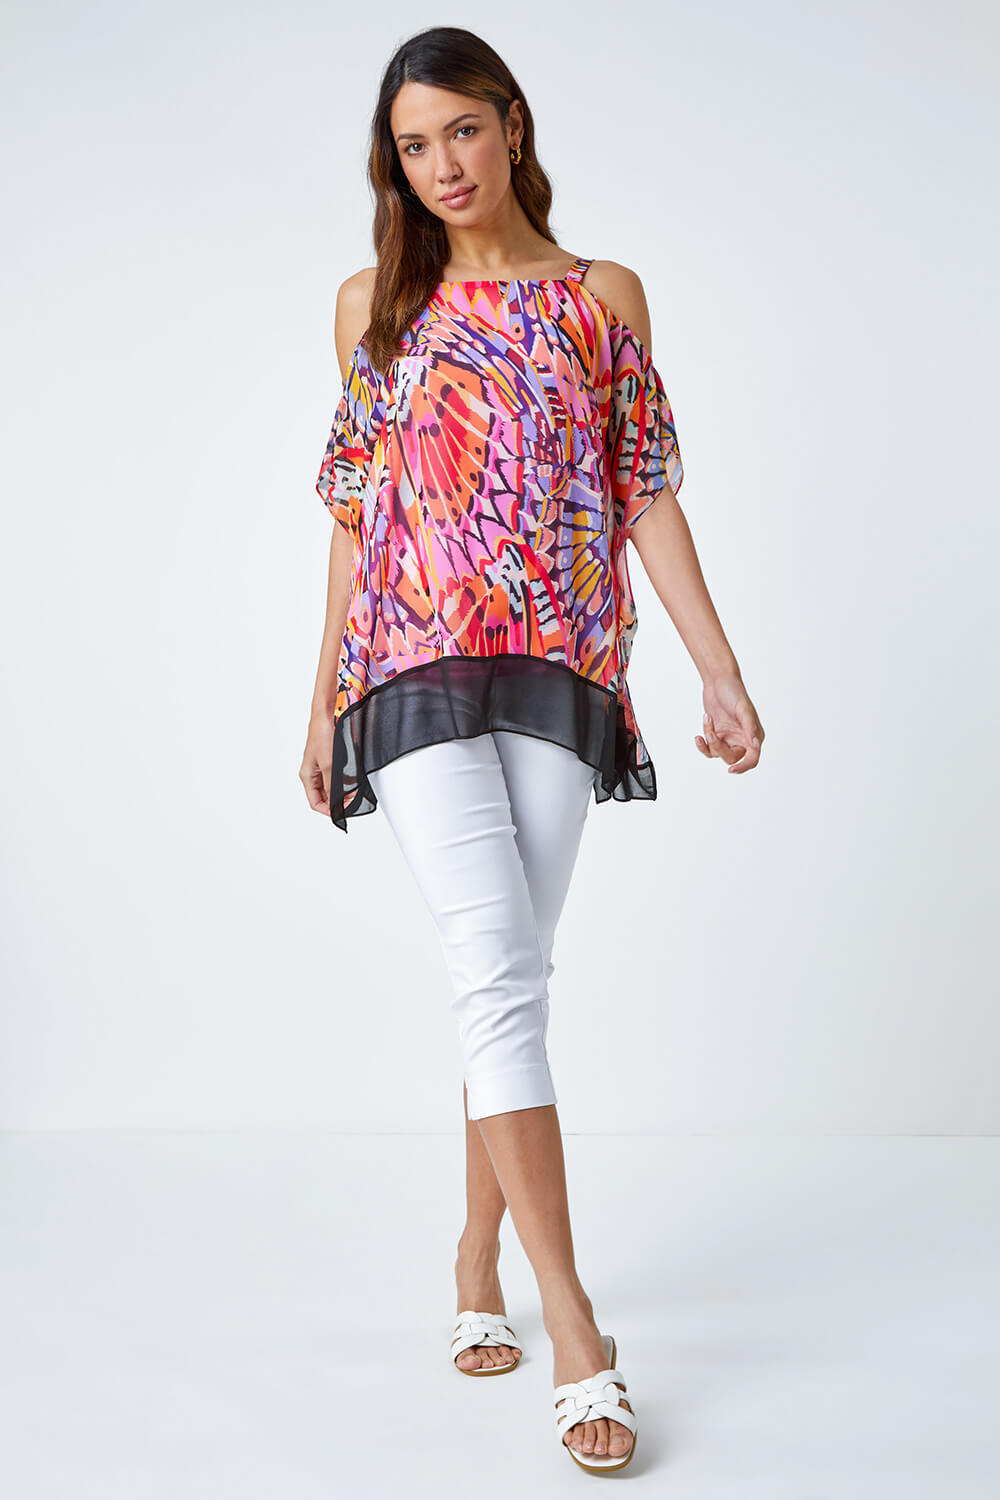 PINK Butterfly Contrast Cold Shoulder Top, Image 2 of 5